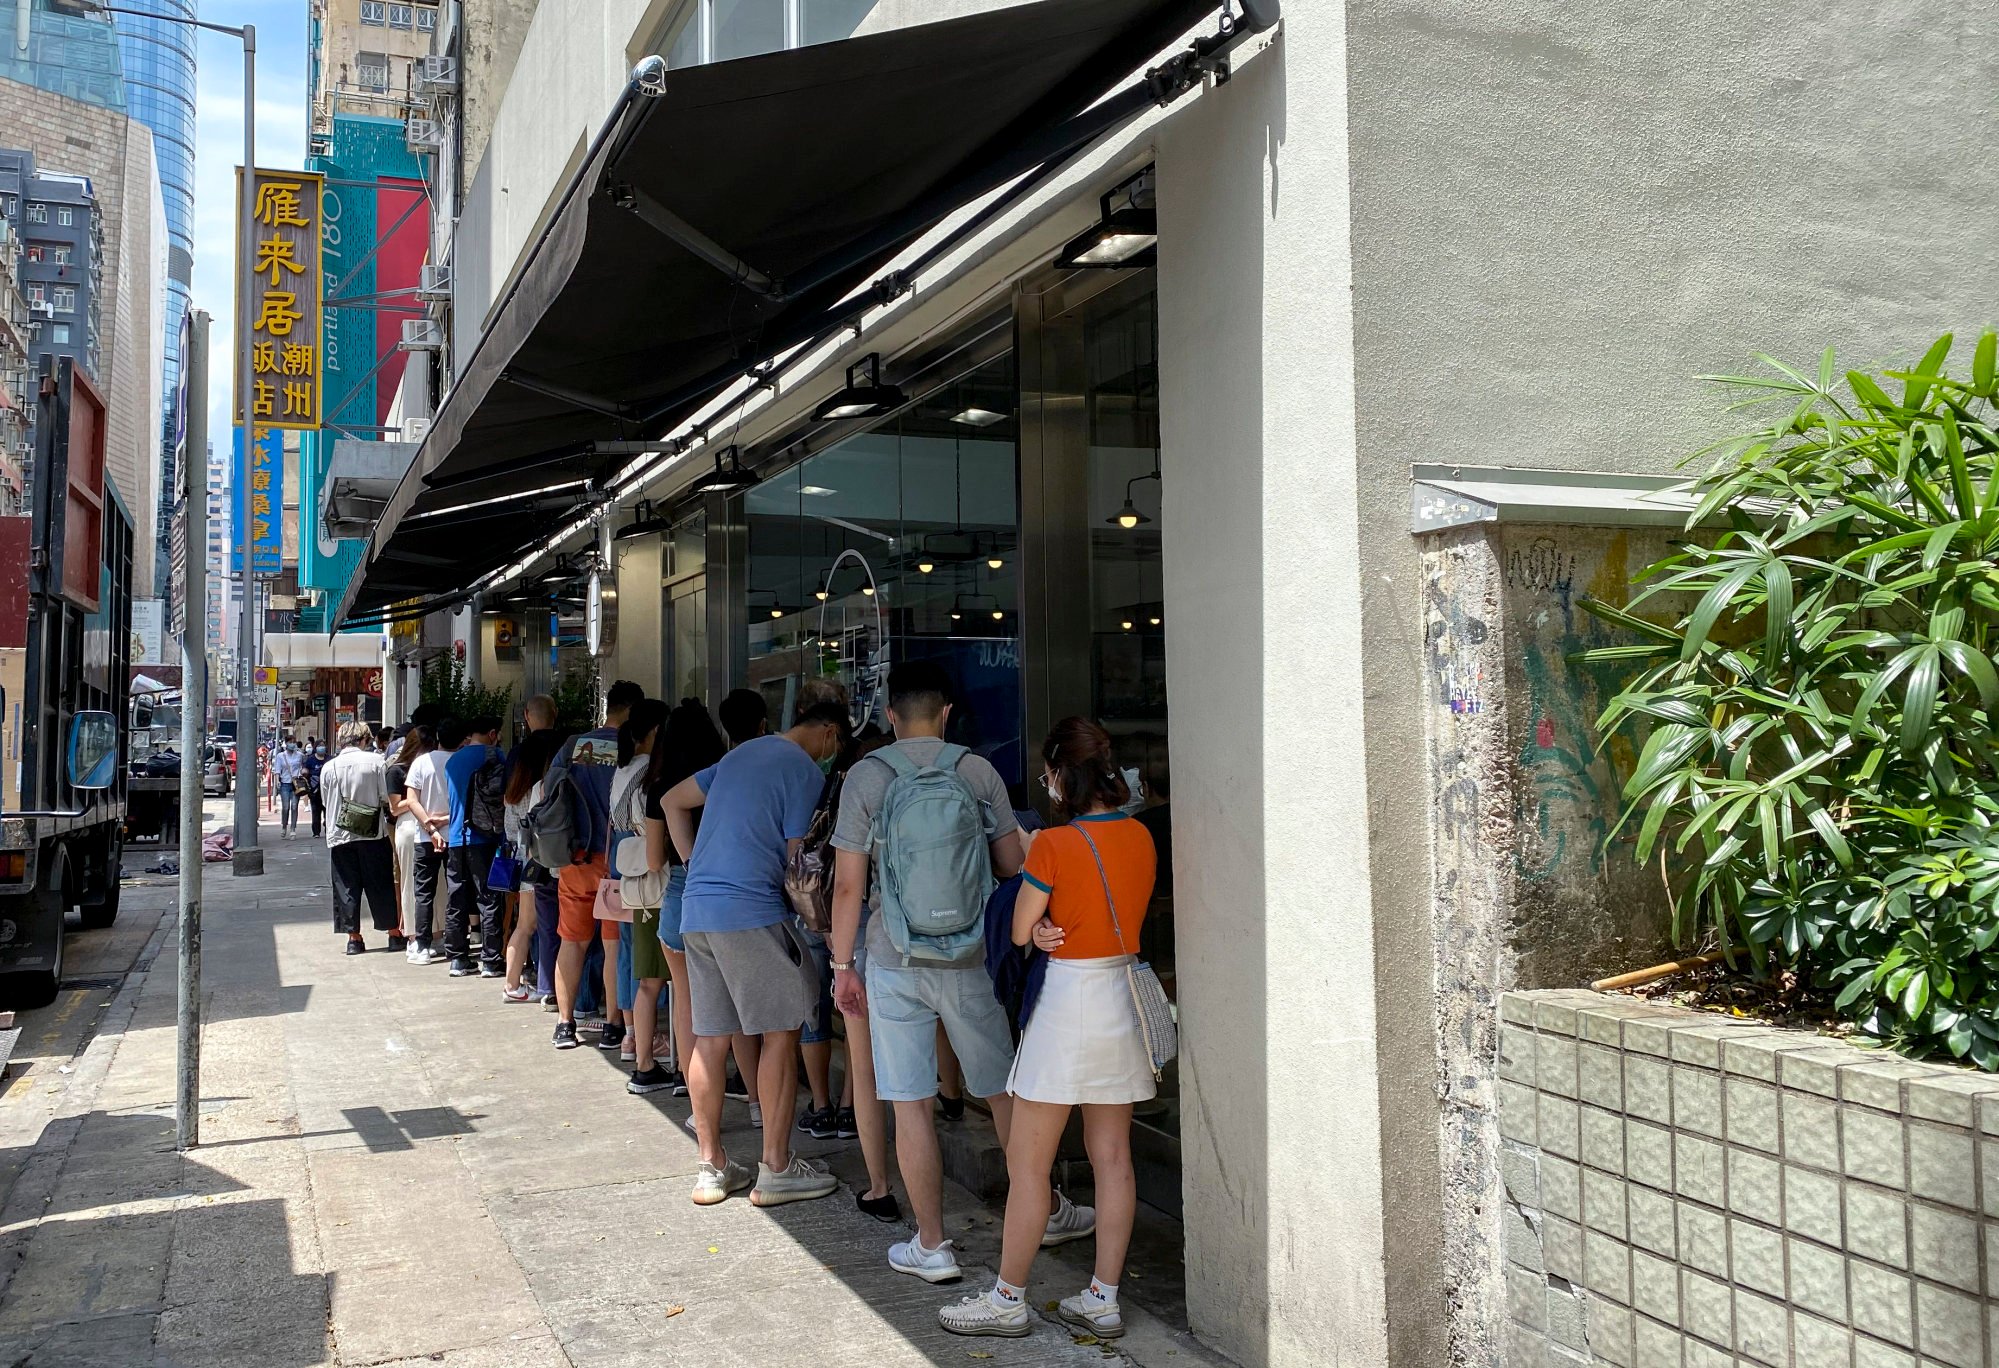 Customers throng a Hong Kong shop in 2020 known for its support of the protest movement. Photo: Karen Zhang